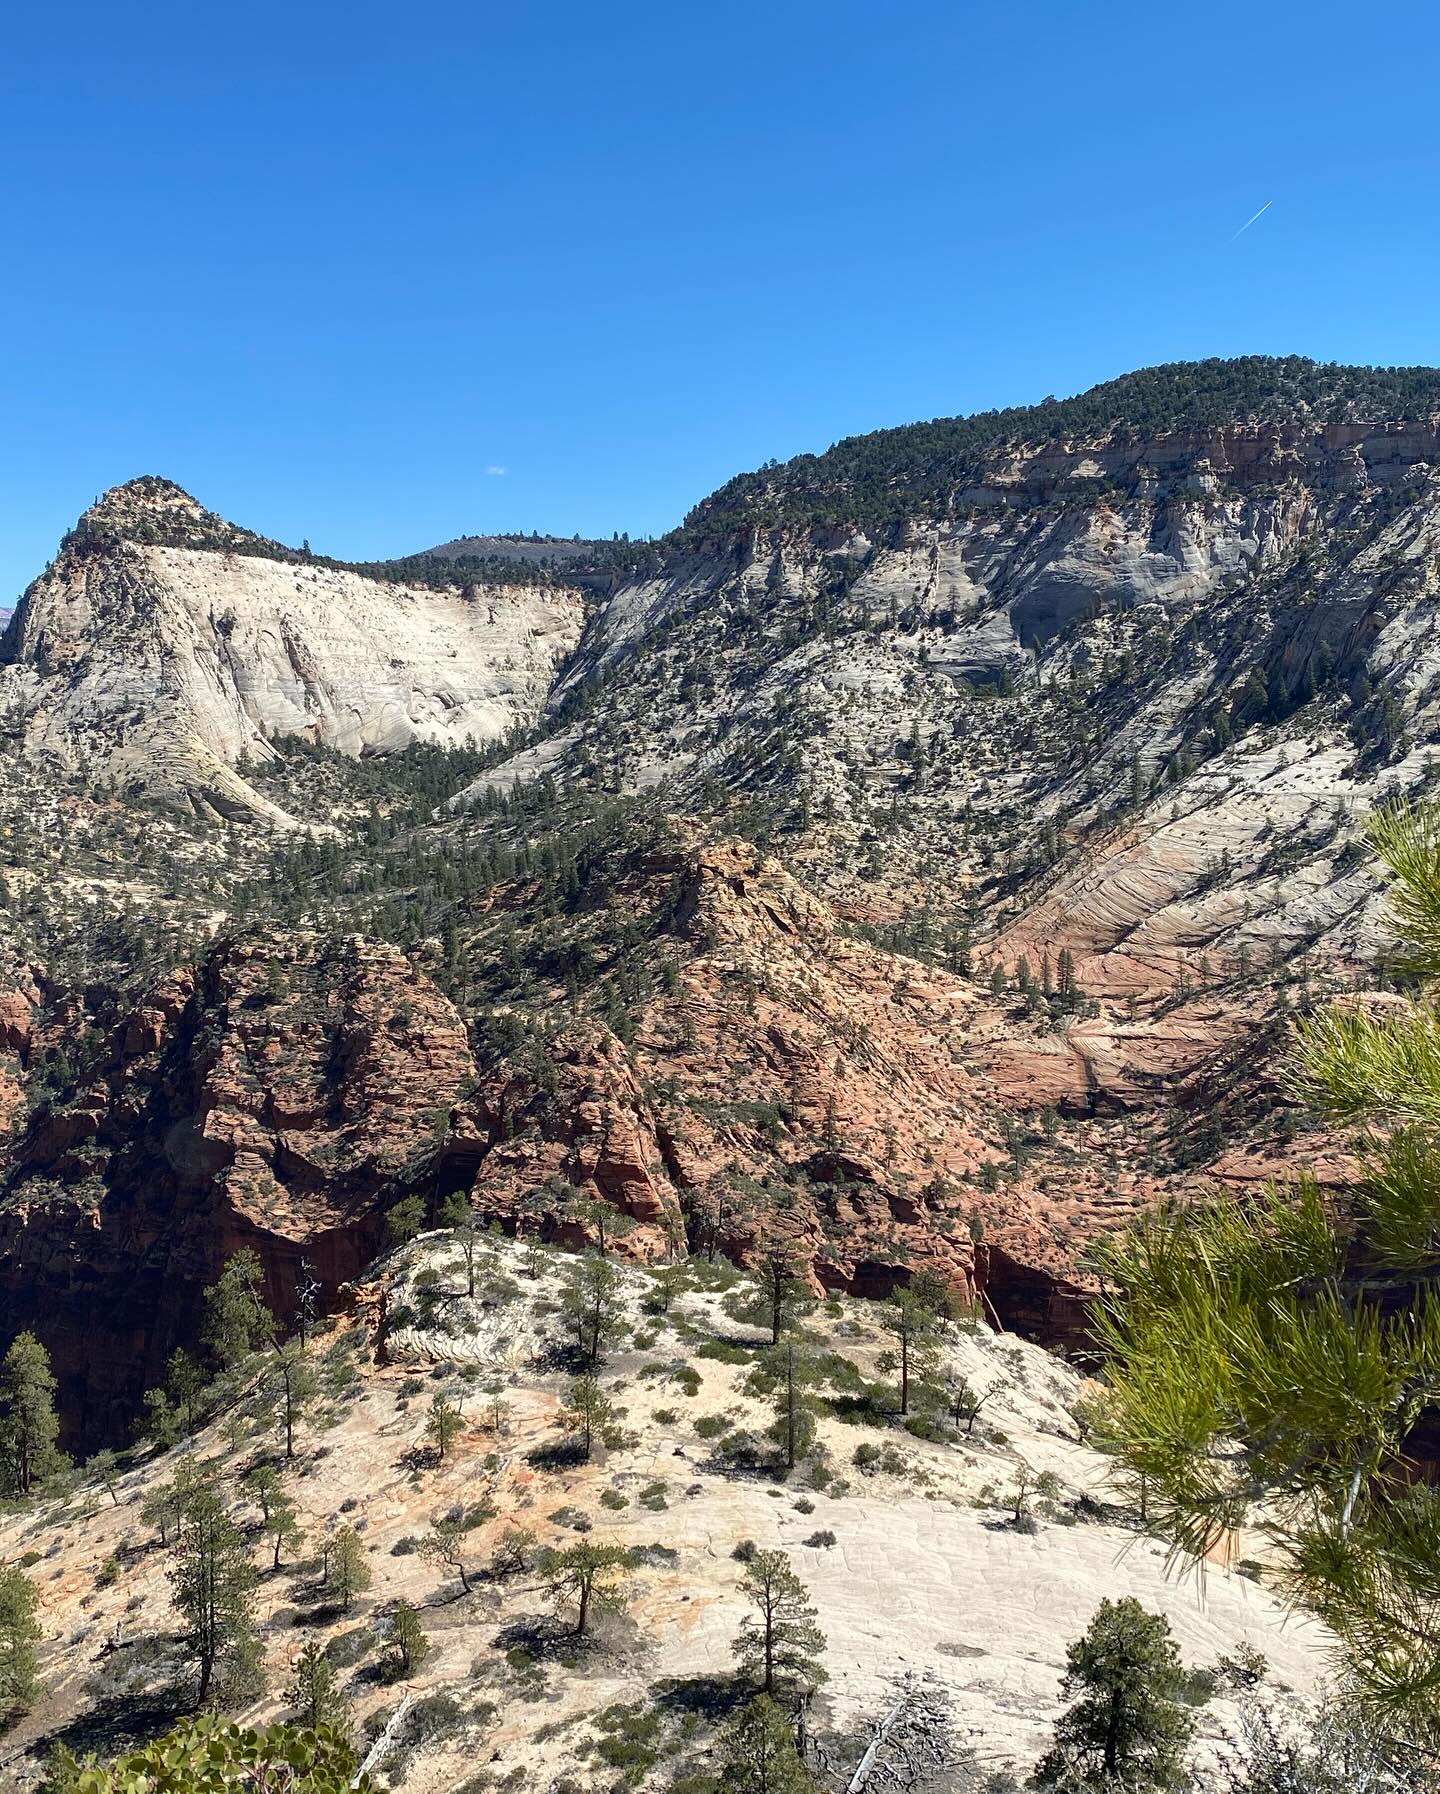 Day 1 of the Zion of Fitness Retreat ⛰️ 
Angels Landings & West Rim Trail

#teamquinnfit #zion #hiking